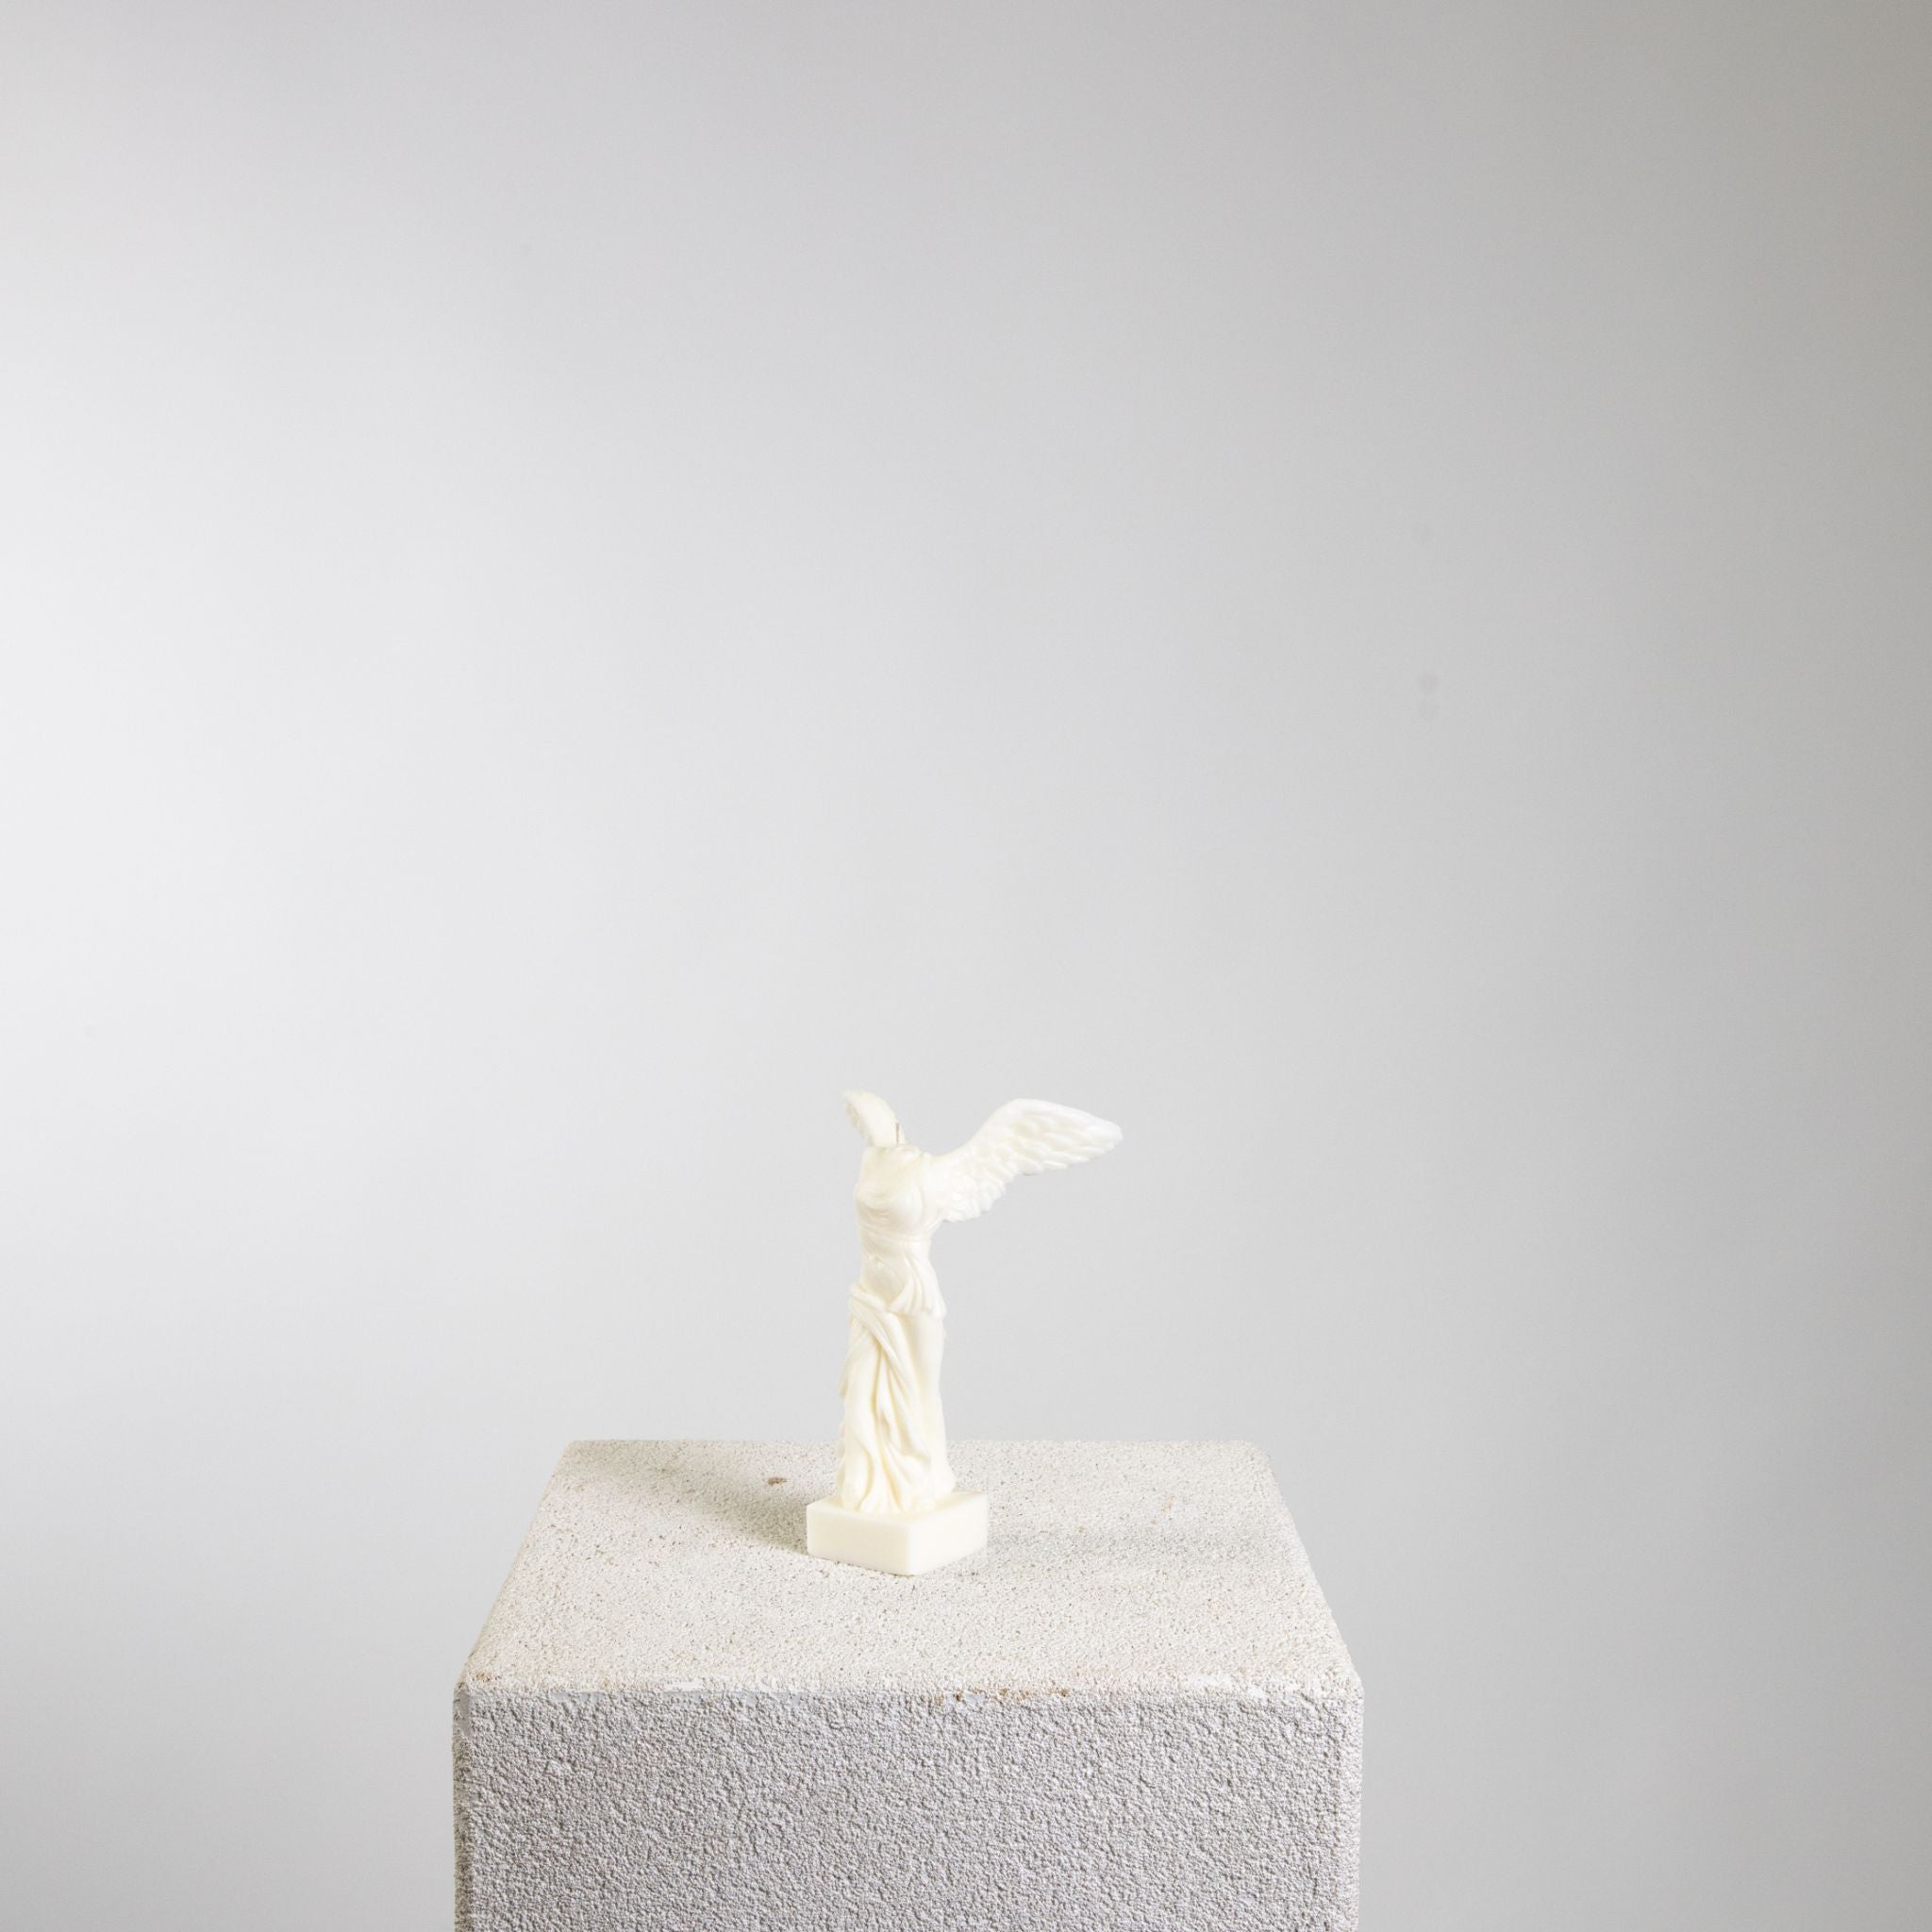 Winged Victory Sculptural Soy Wax Candle